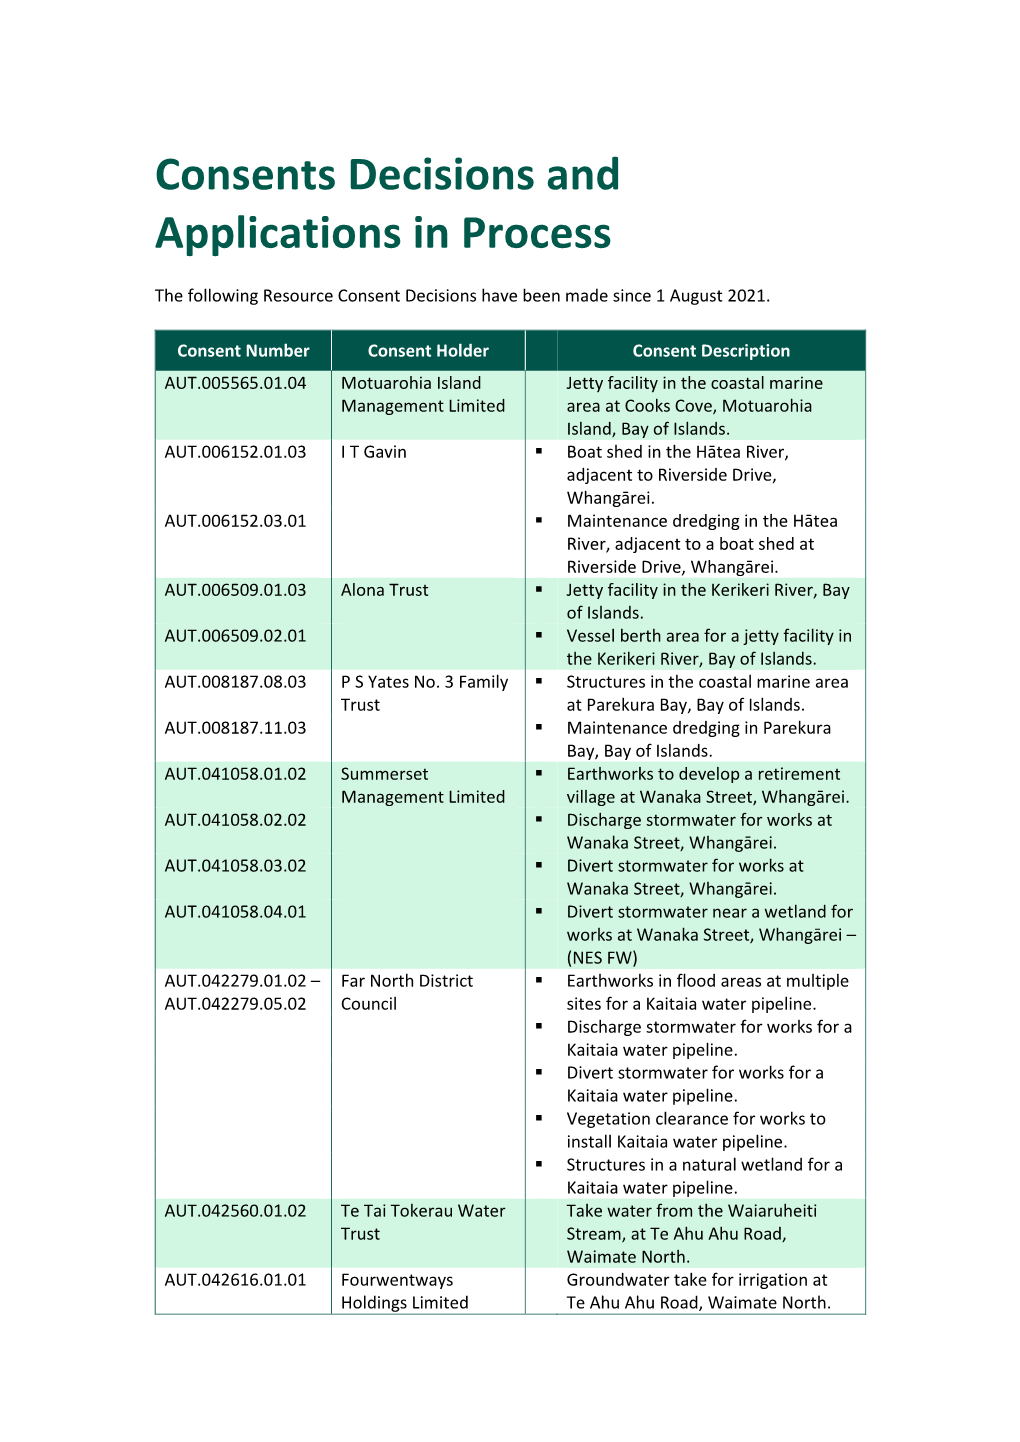 Consents Decisions and Applications in Process